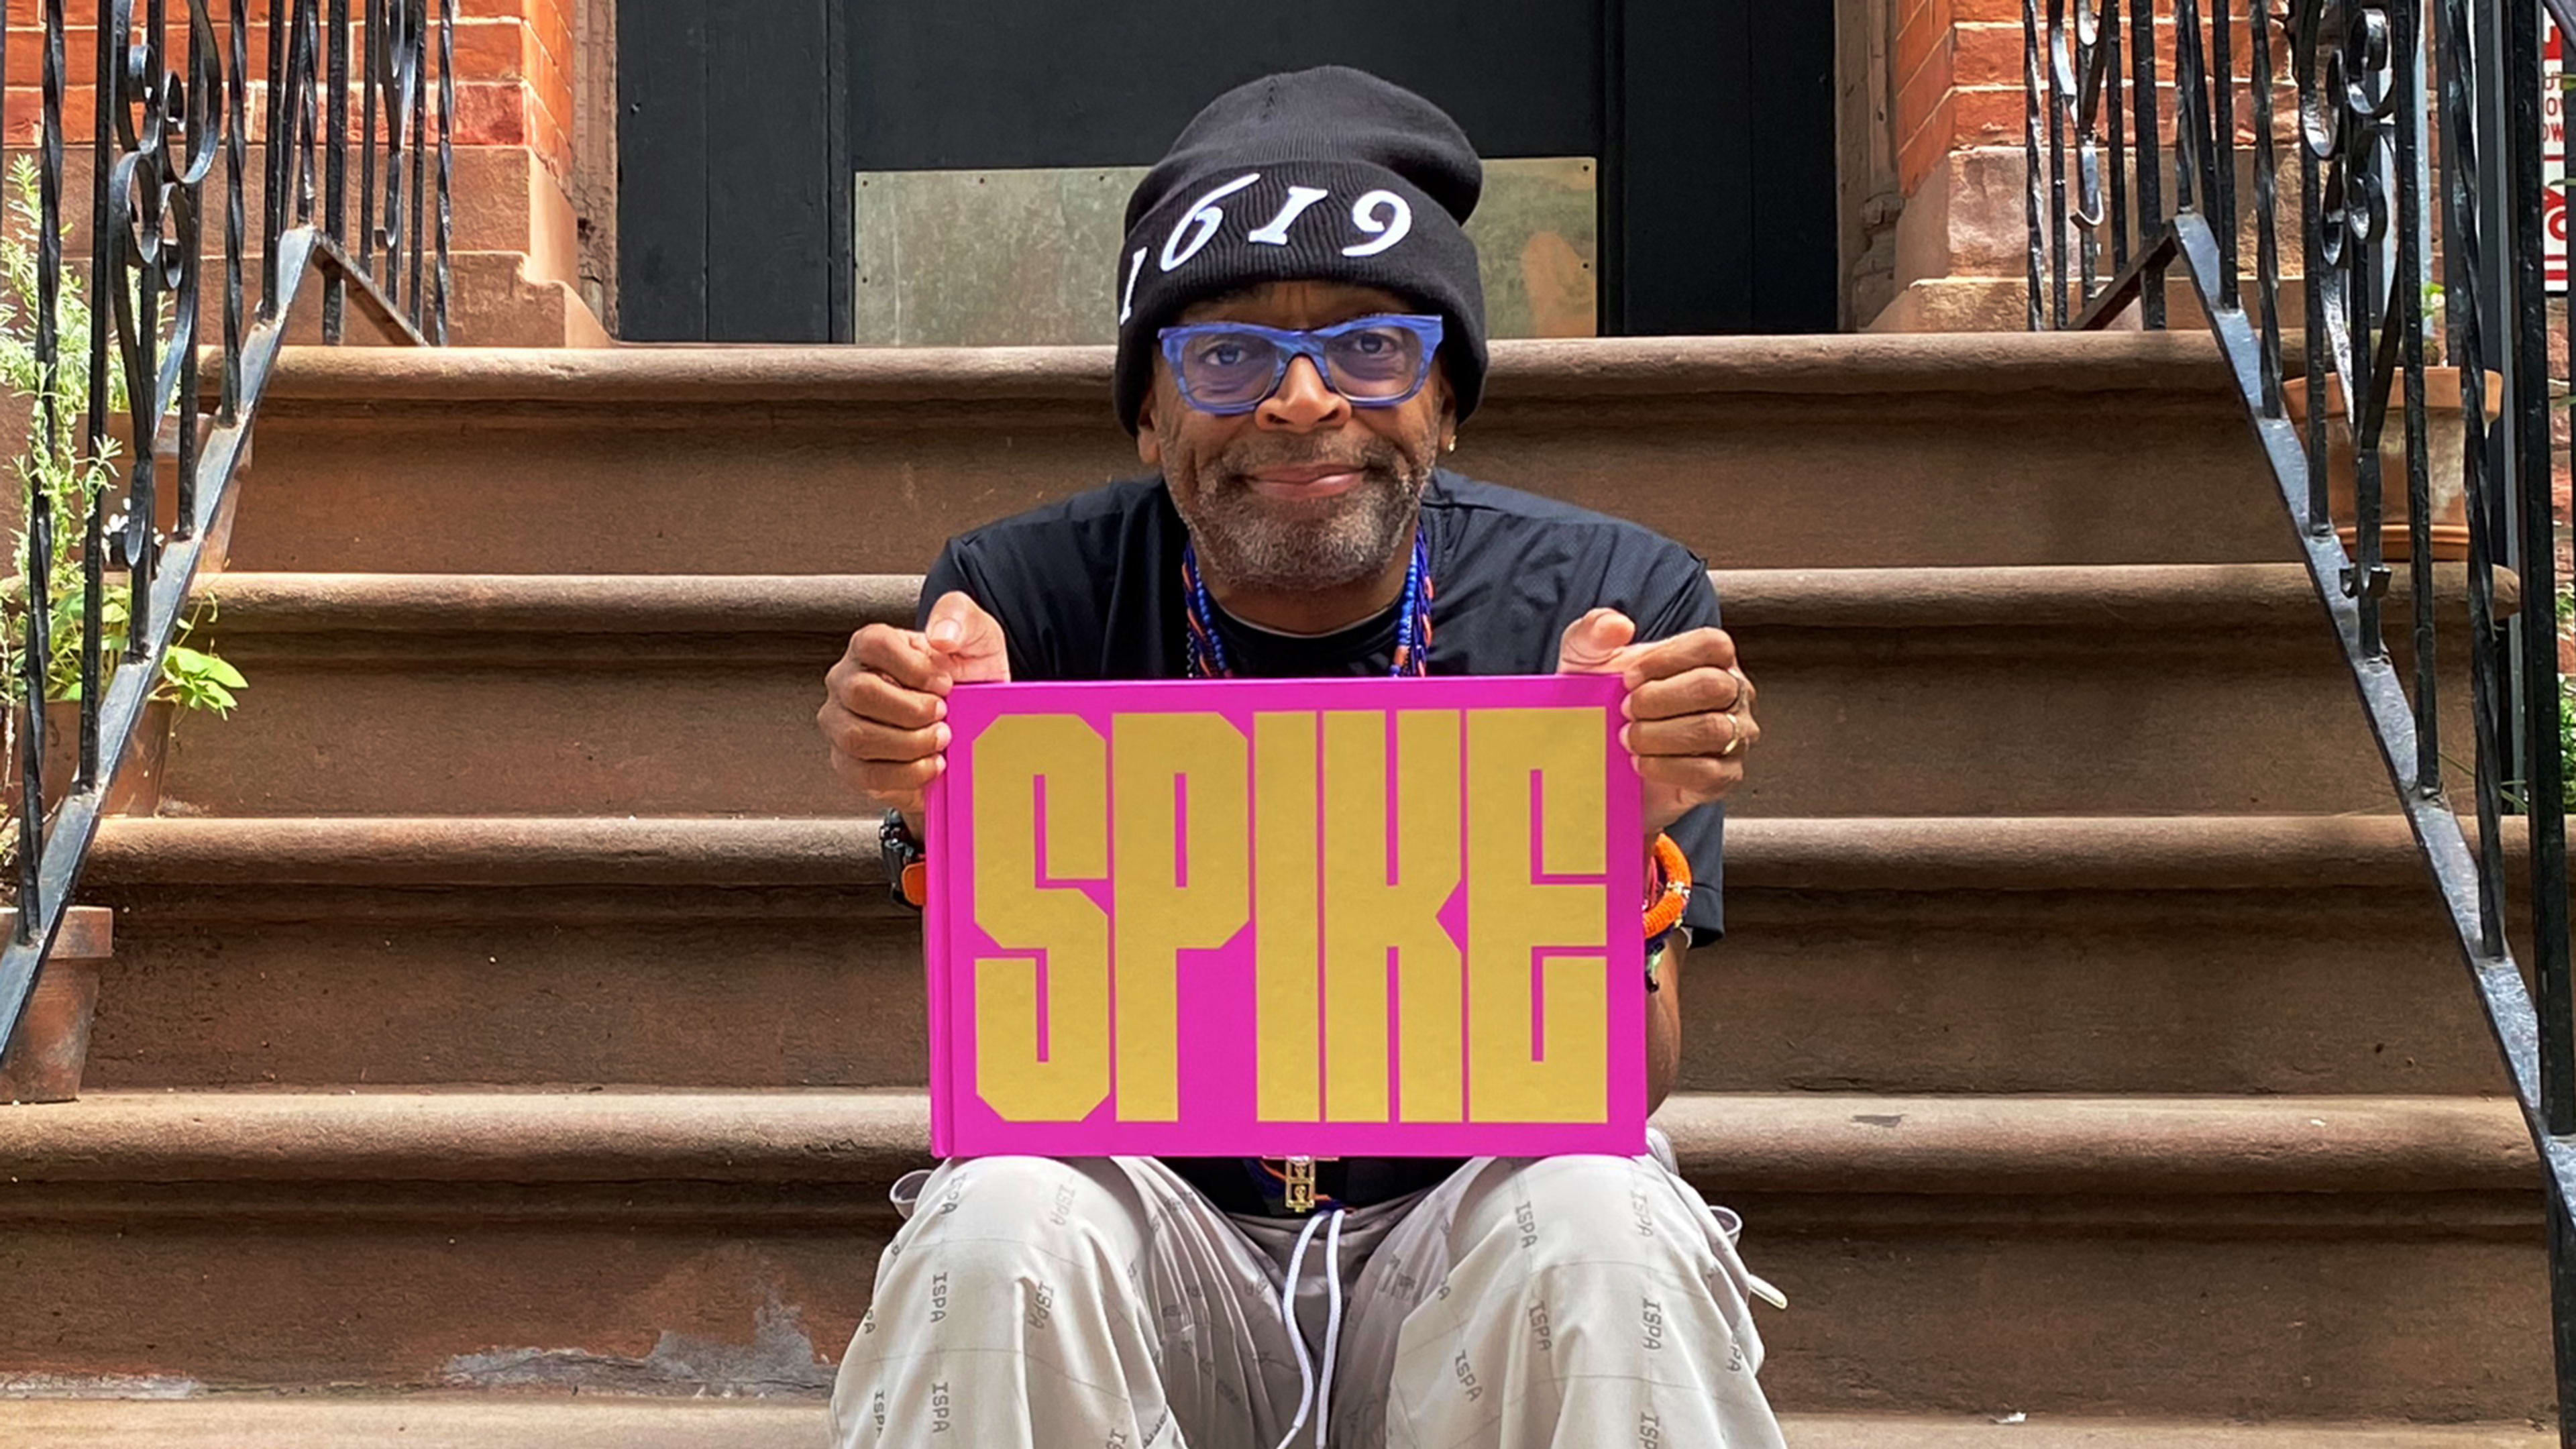 Spike Lee’s career is unparalleled. Dive deep in his stunning new book